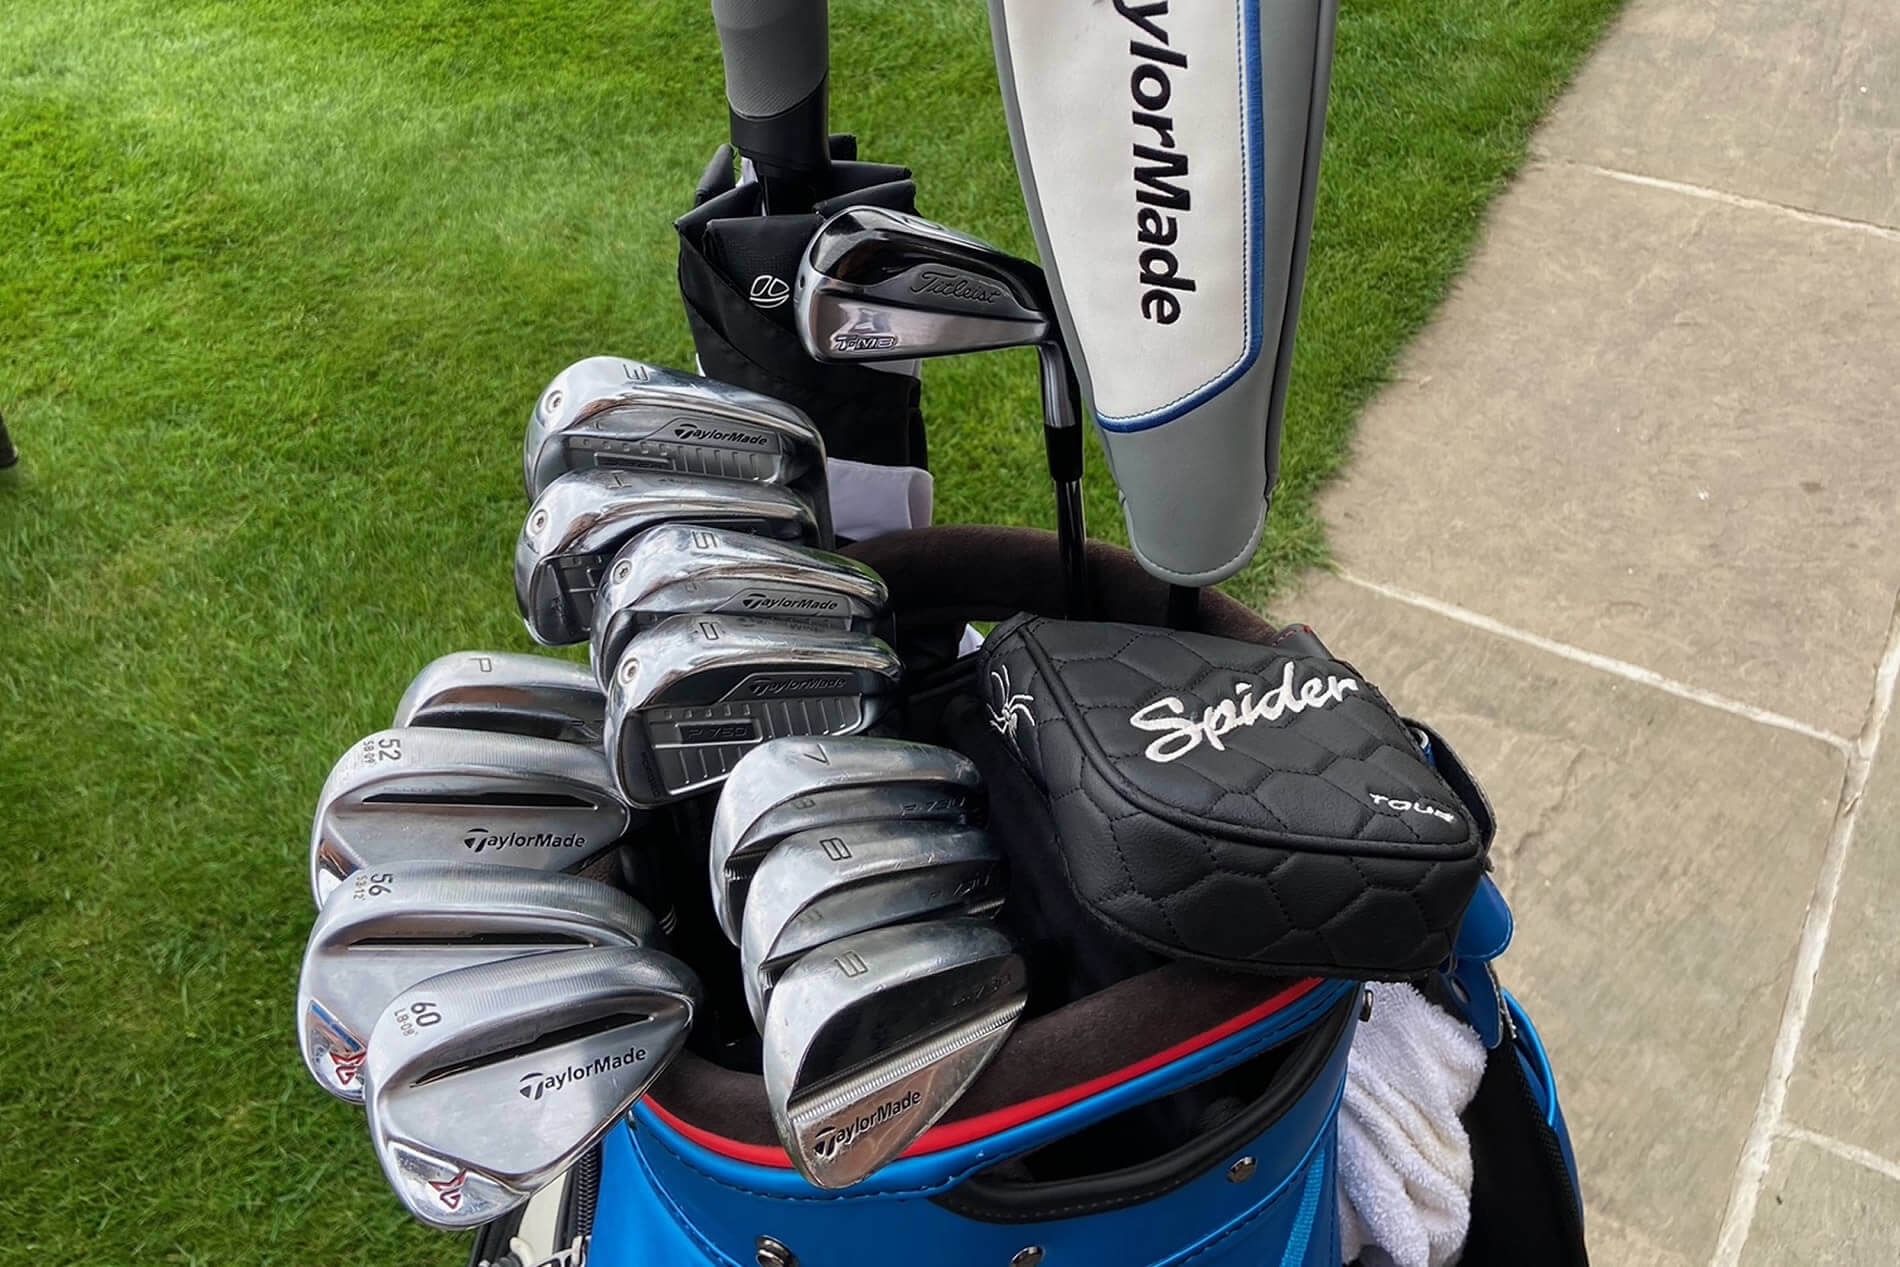 What’s in my golf bag?